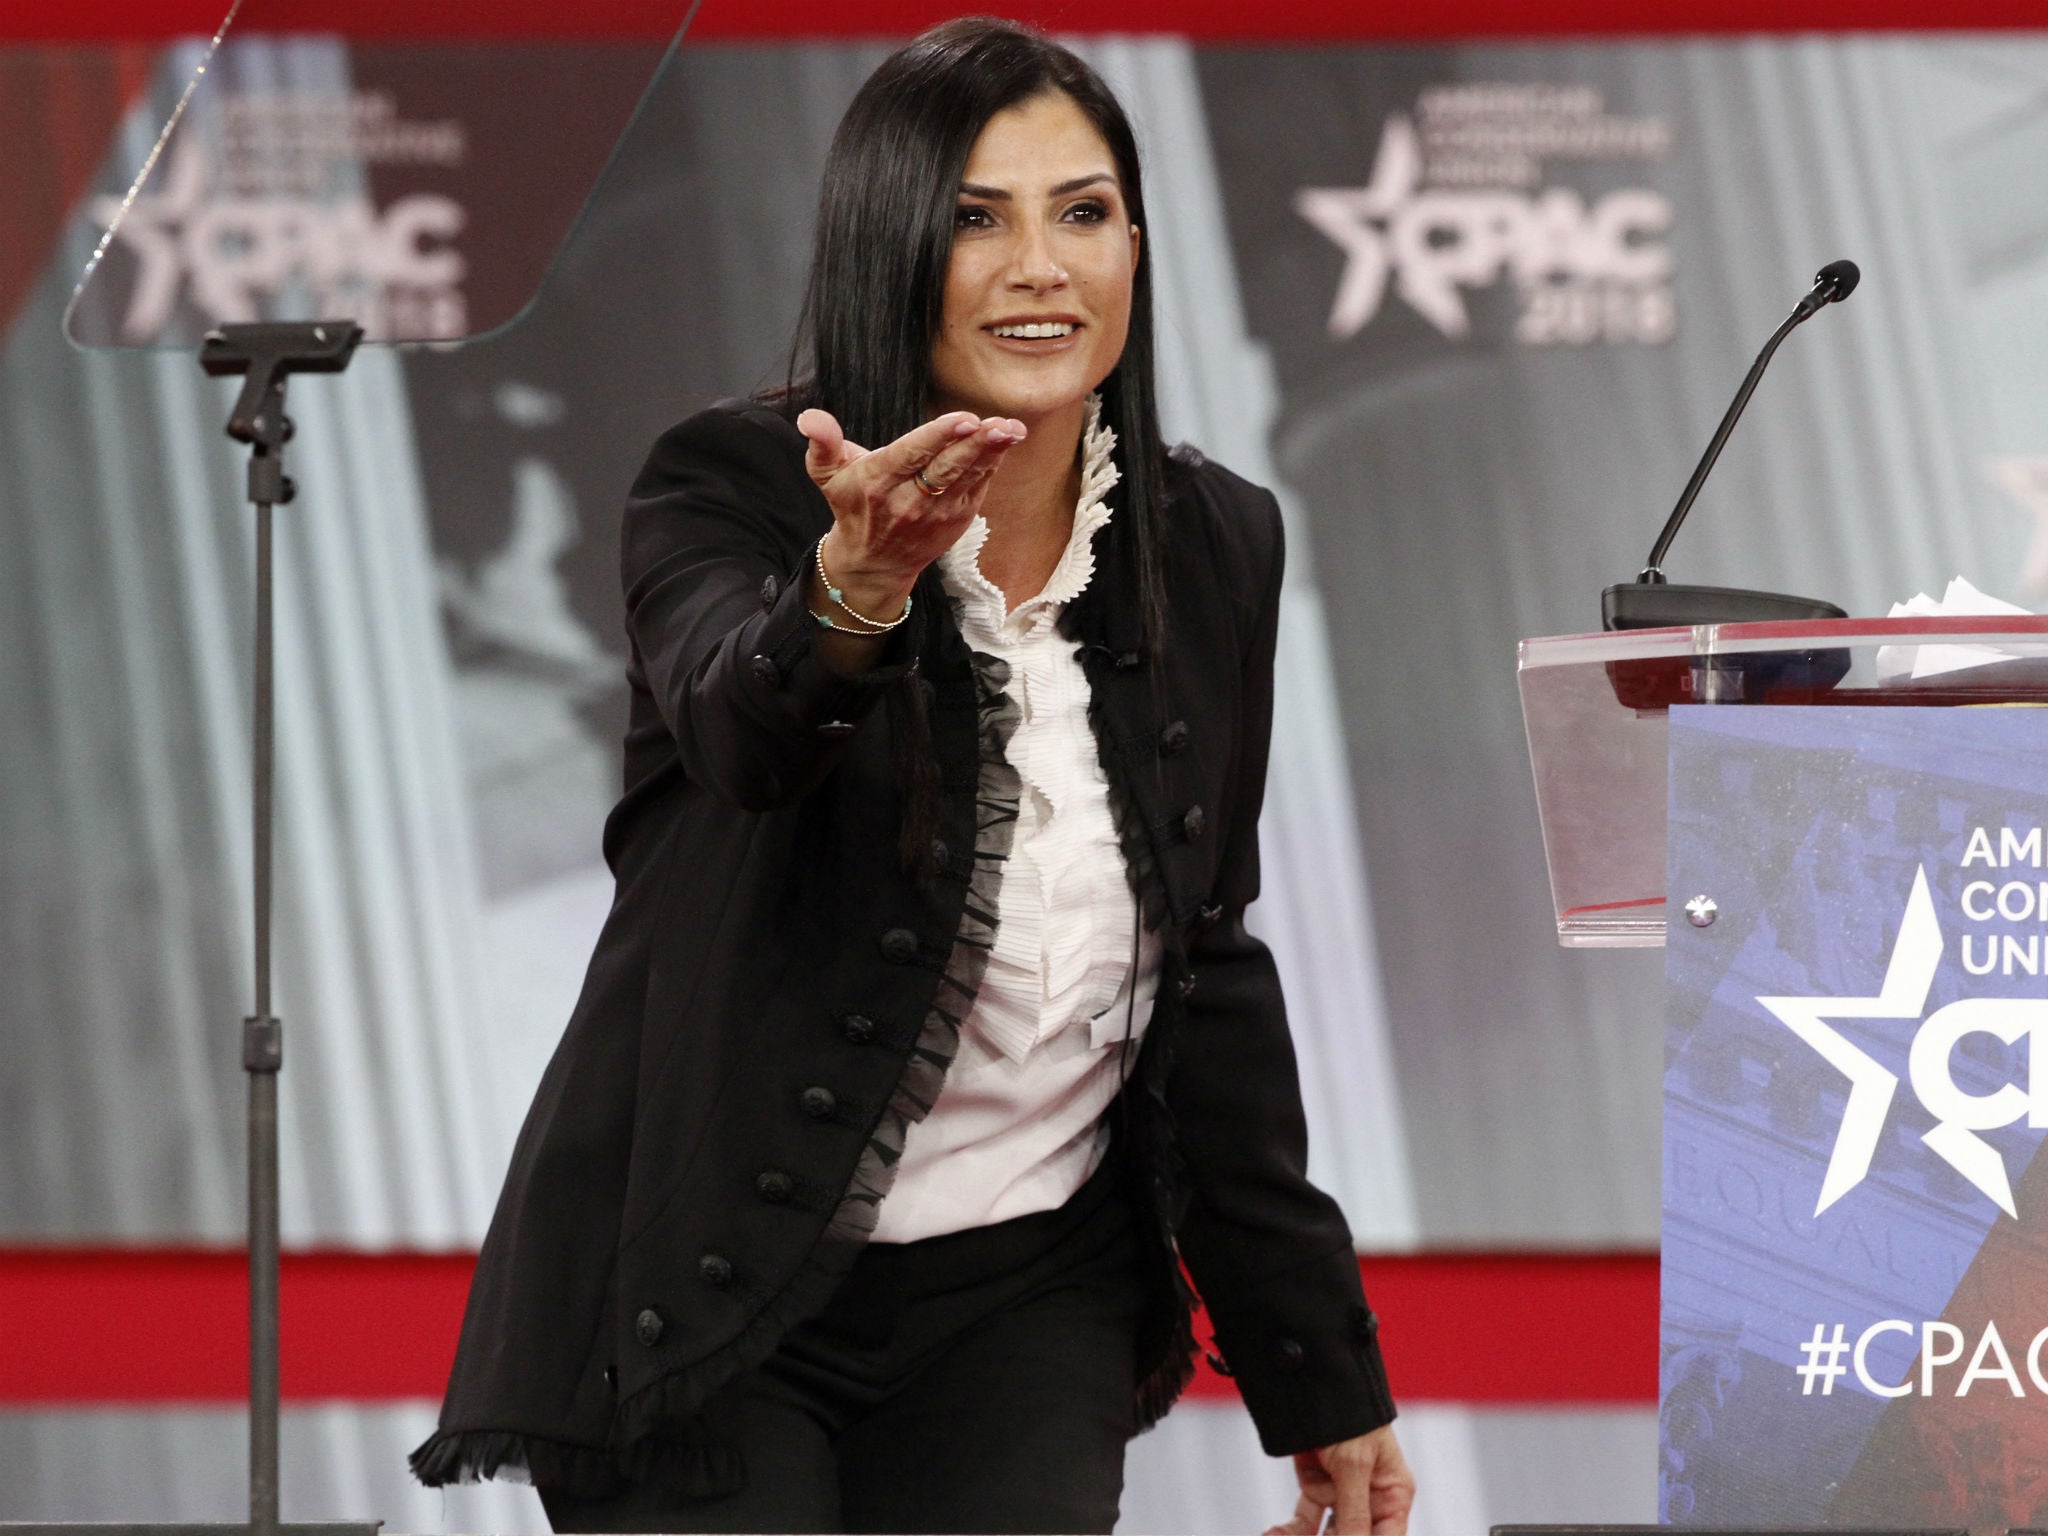 Dana Loesch, spokesperson for the National Rifle Association, has tried to play down talks of a rift with President Donald Trump